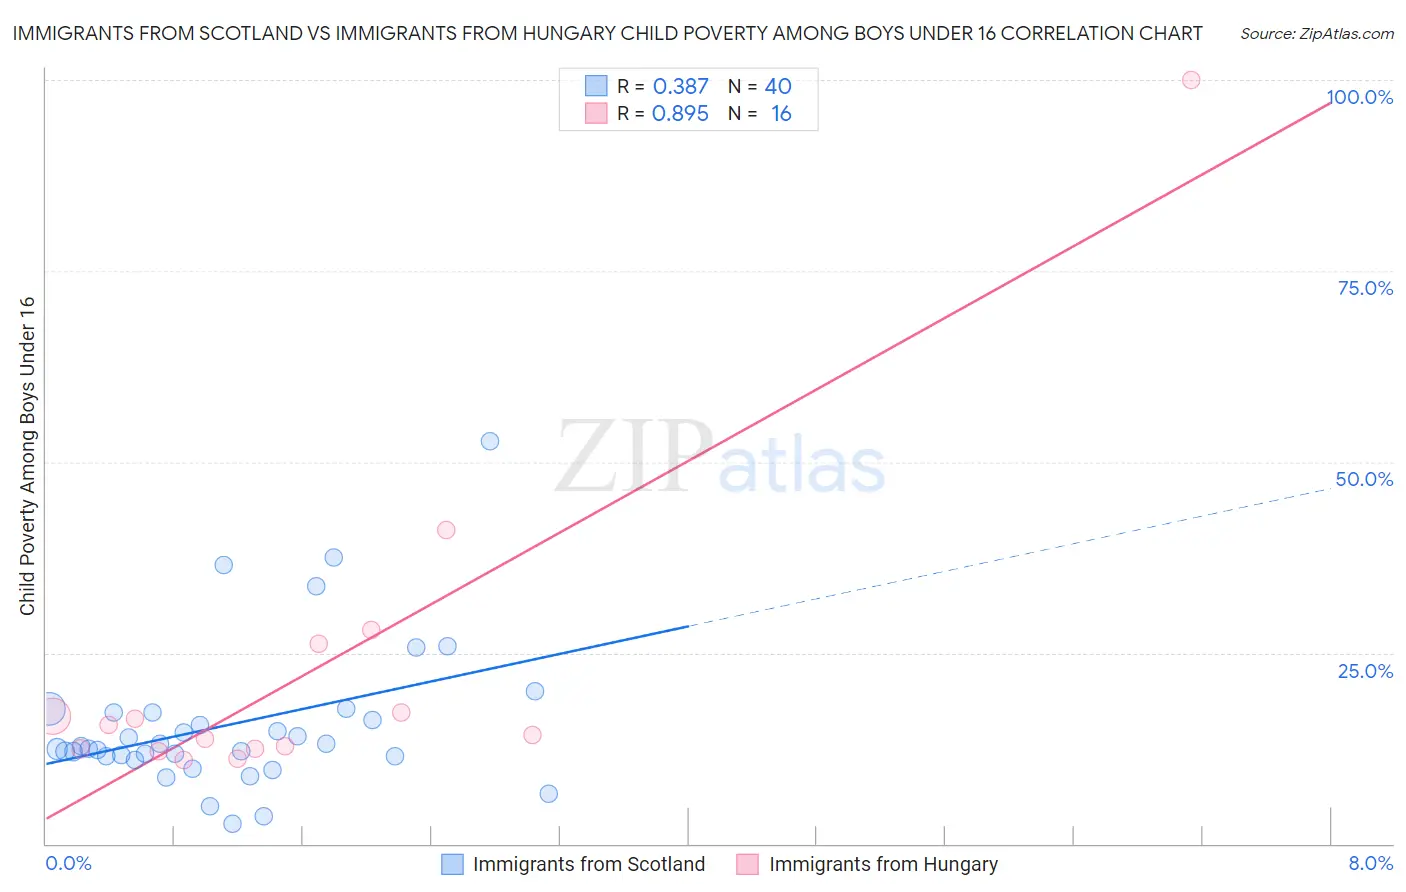 Immigrants from Scotland vs Immigrants from Hungary Child Poverty Among Boys Under 16